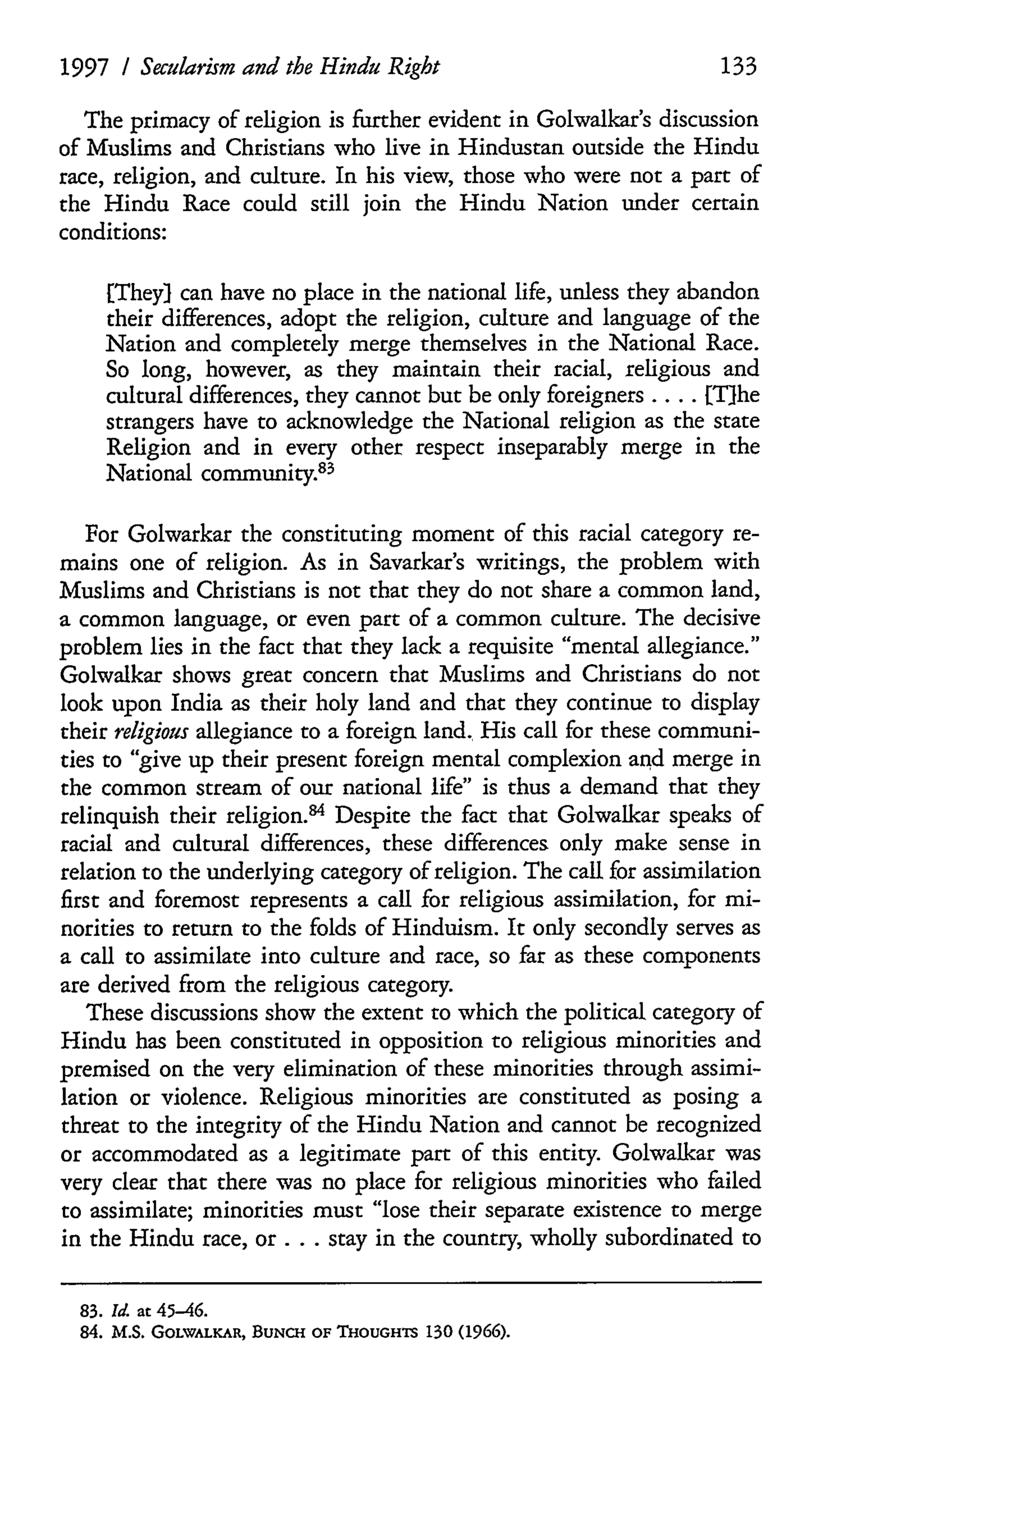 1997 / Secularism and the Hindu Right The primacy of religion is farther evident in Golwalkar's discussion of Muslims and Christians who live in Hindustan outside the Hindu race, religion, and